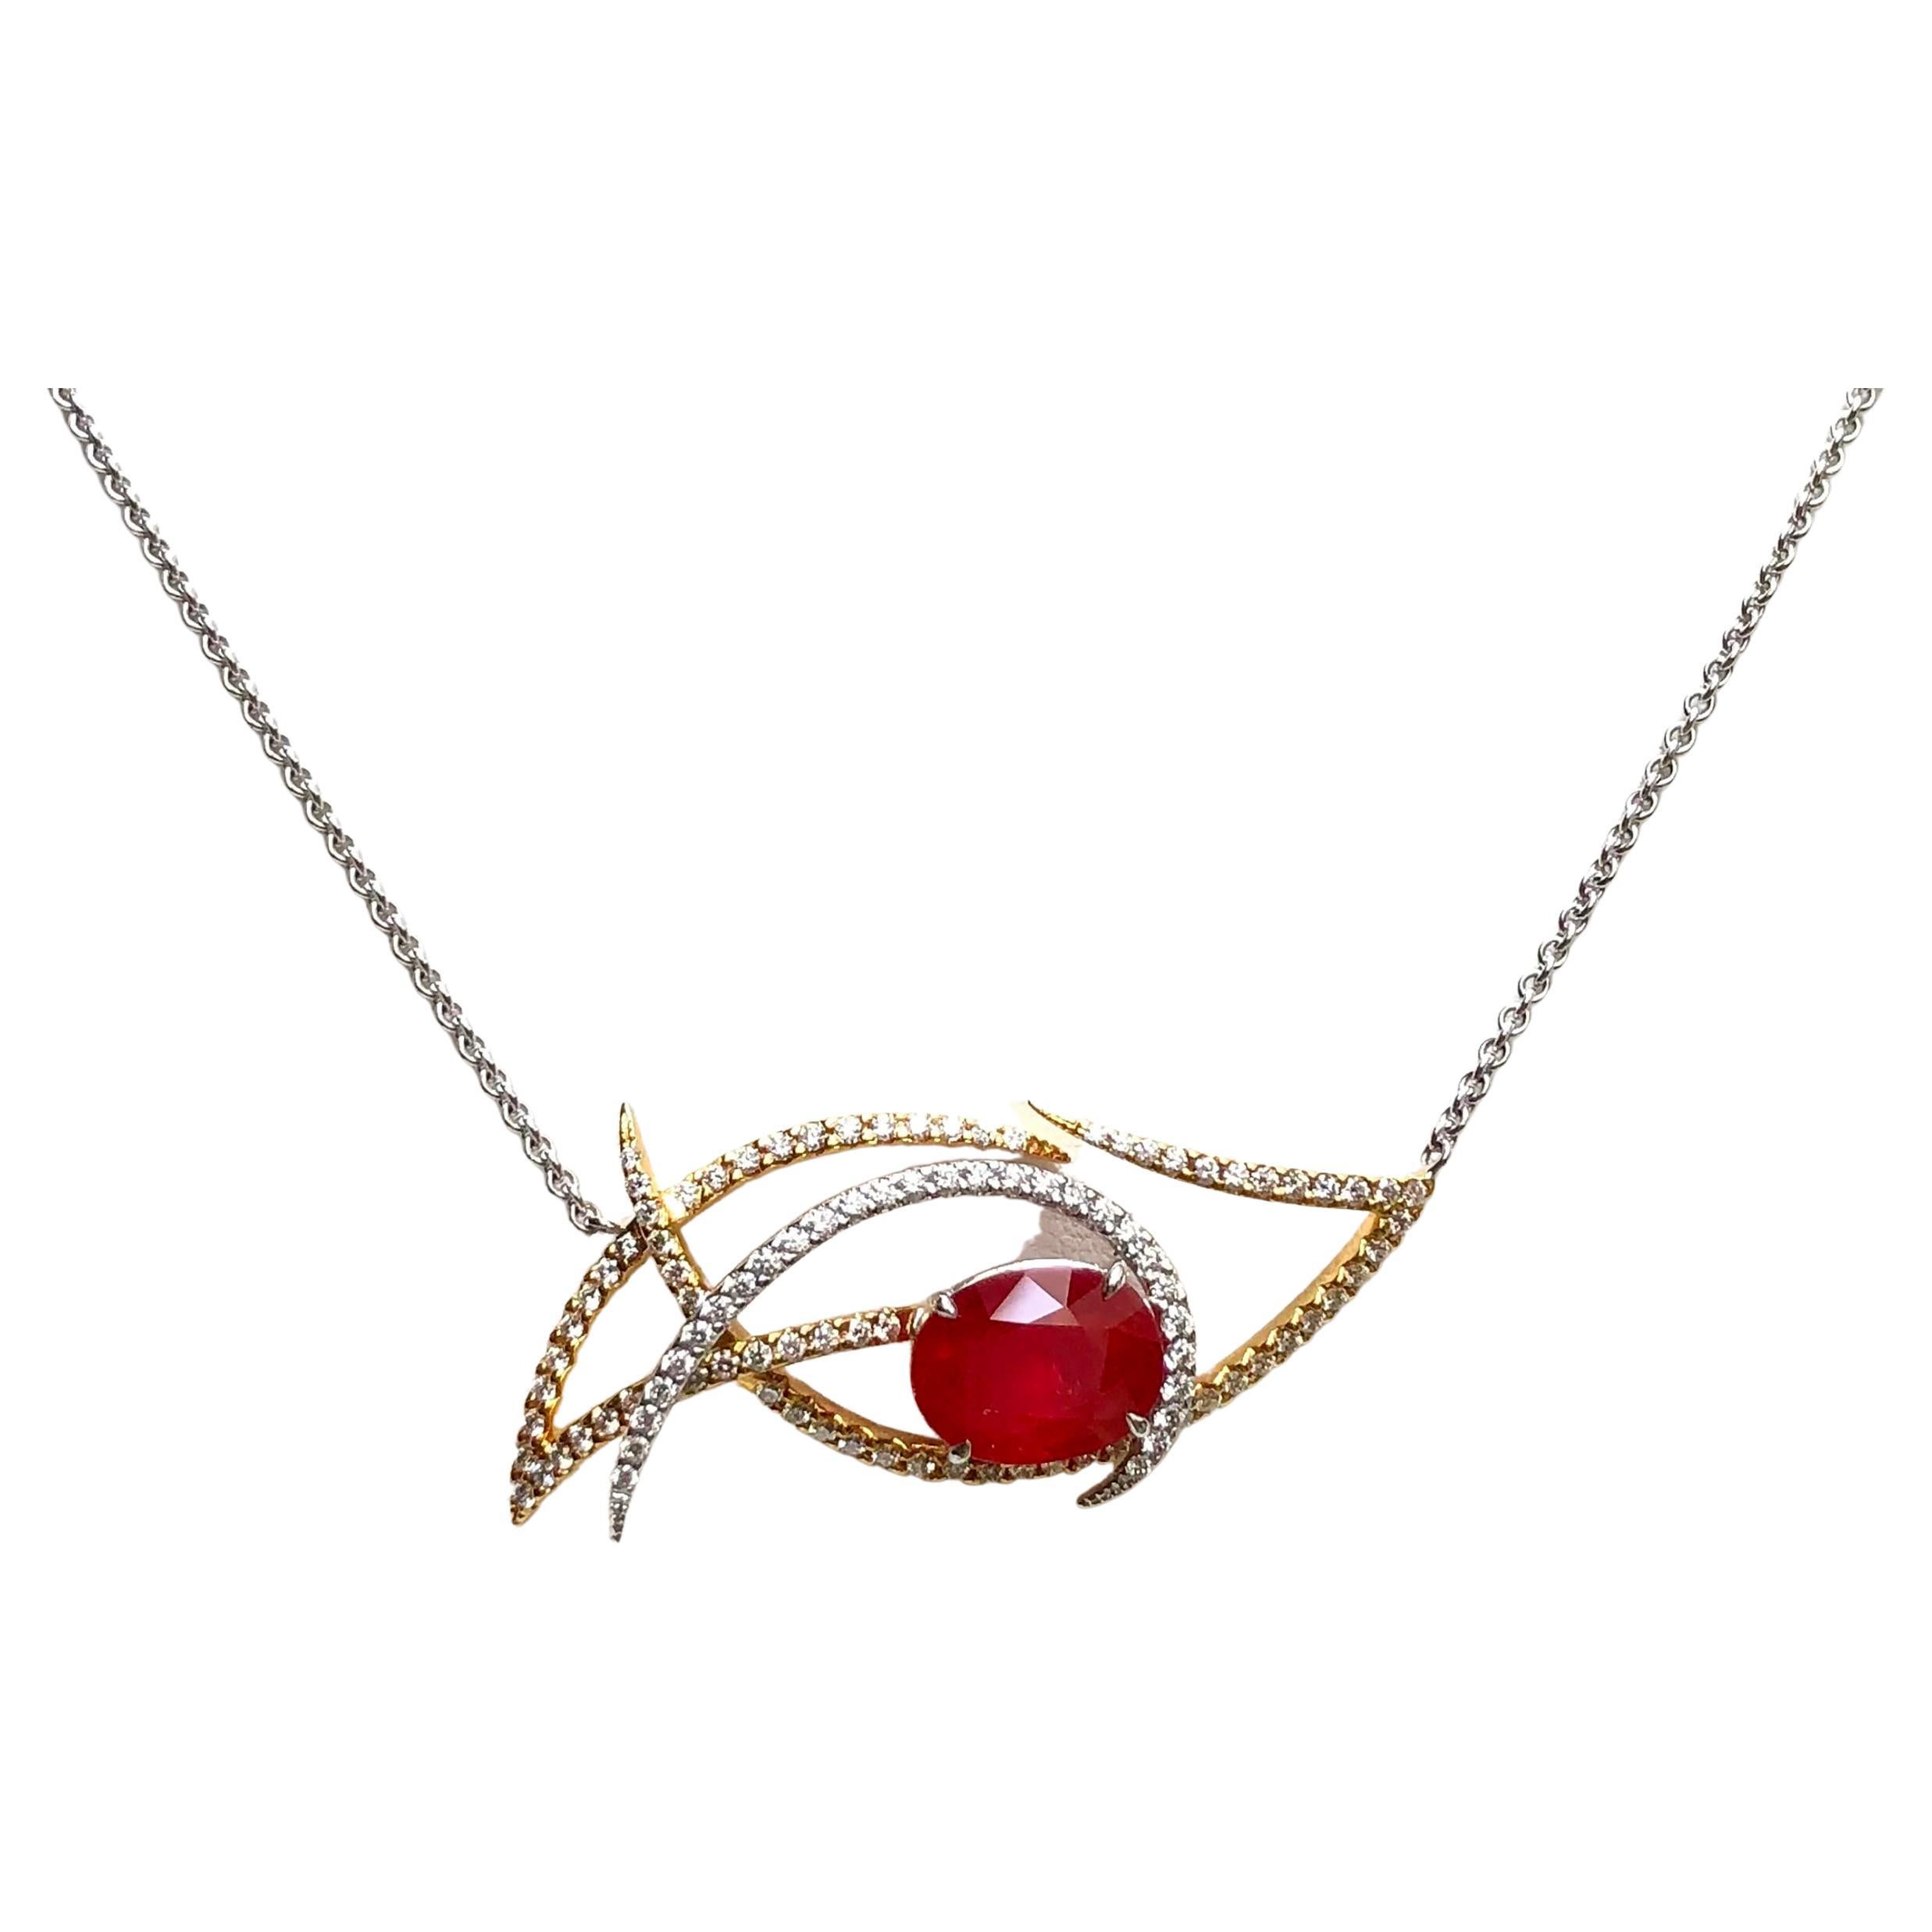 Orange Sapphire with Diamond Hornbill Necklace in 18K Gold by Kavant & Sharart